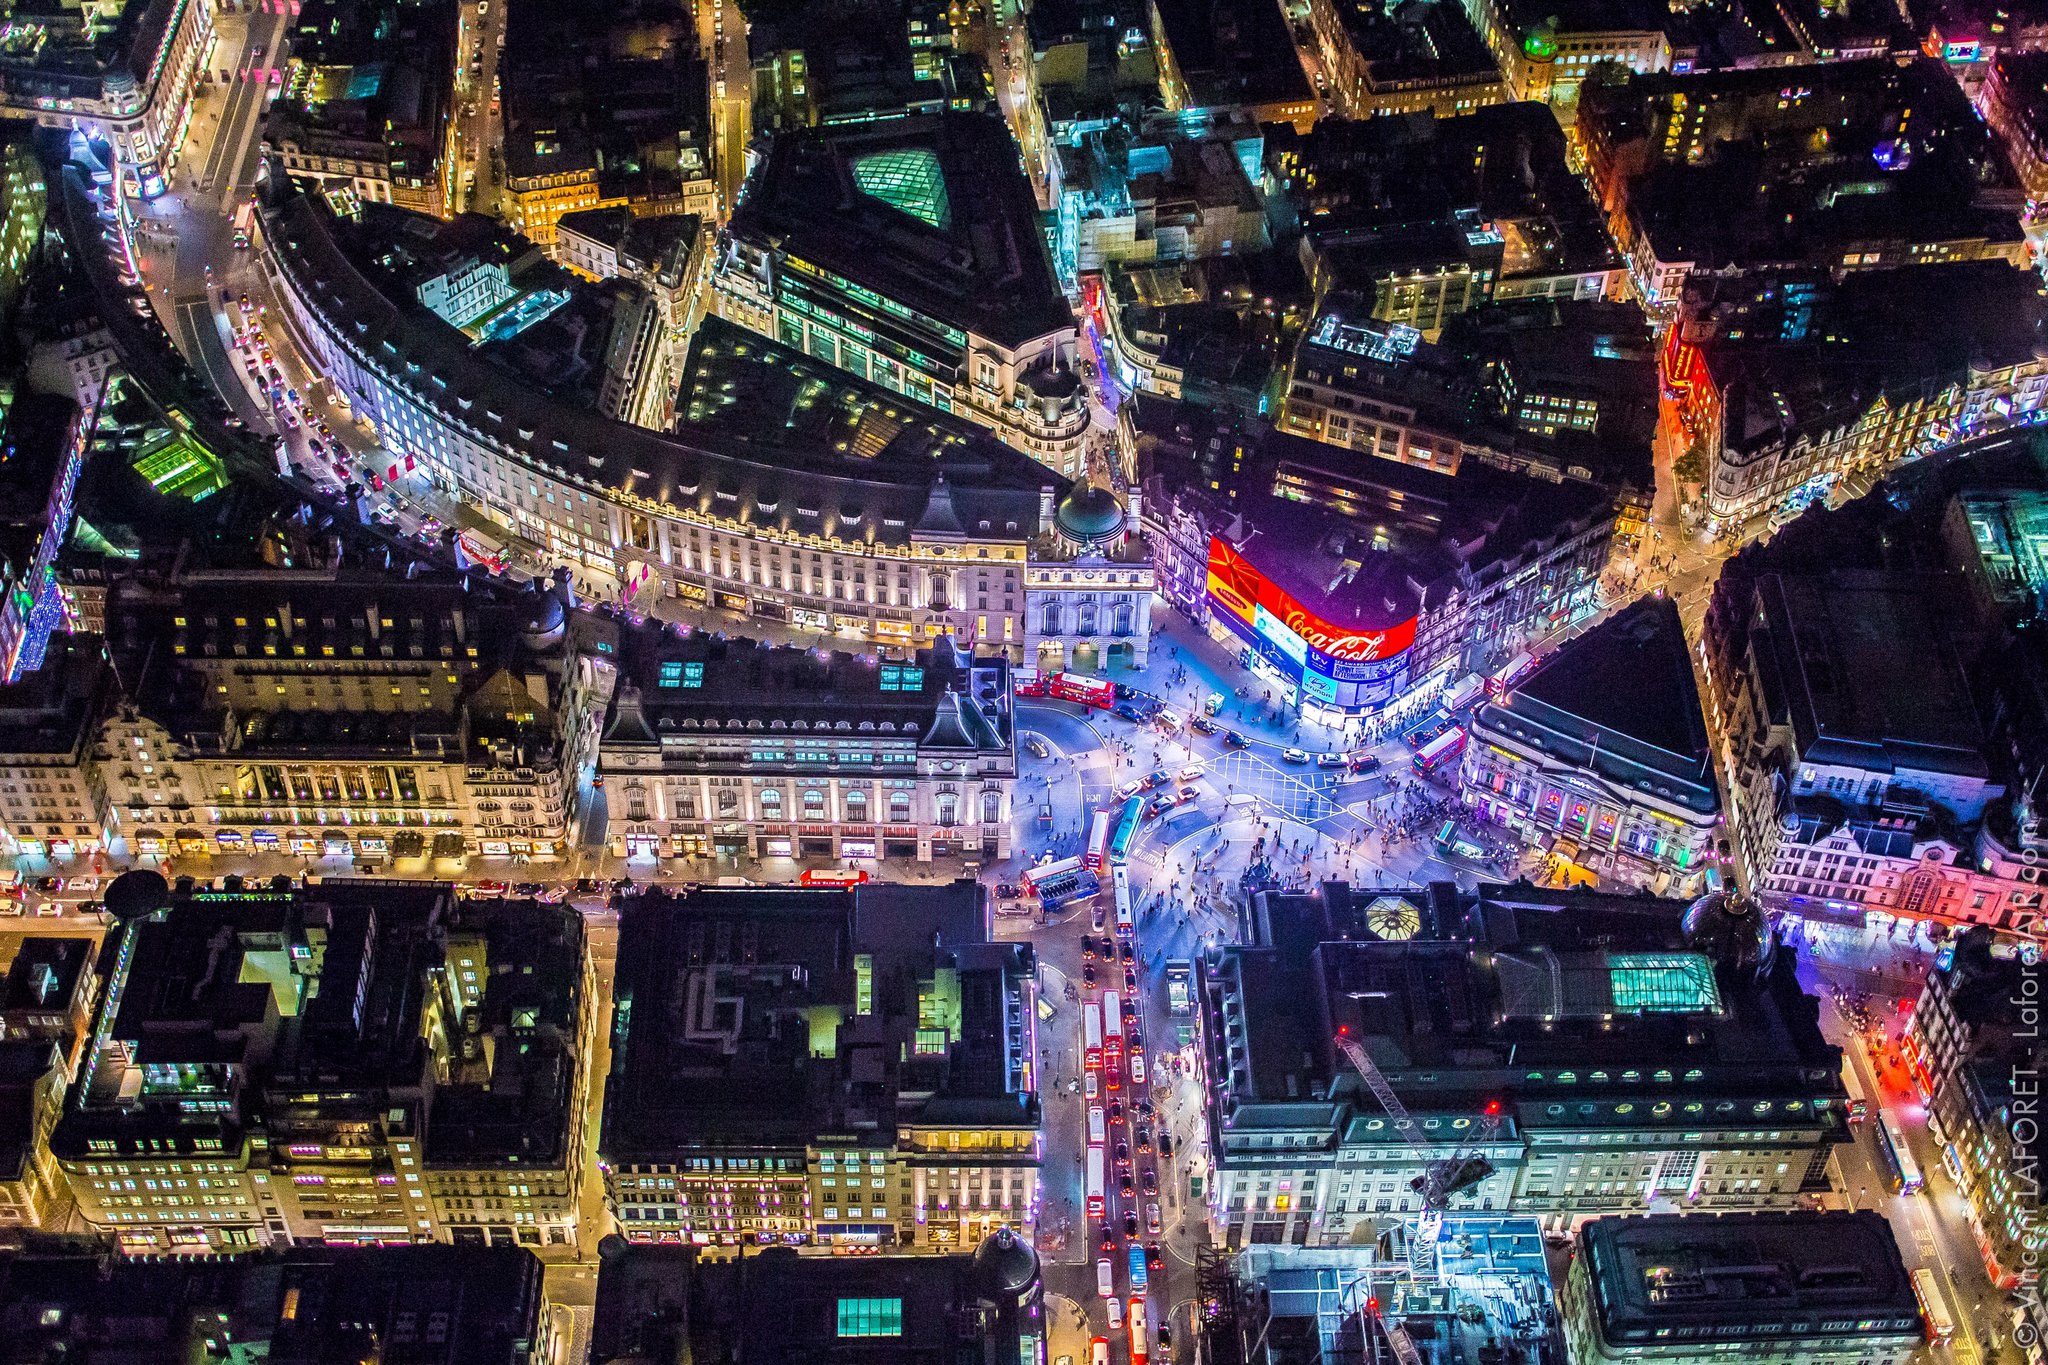 Image Credit : Piccadilly Circus